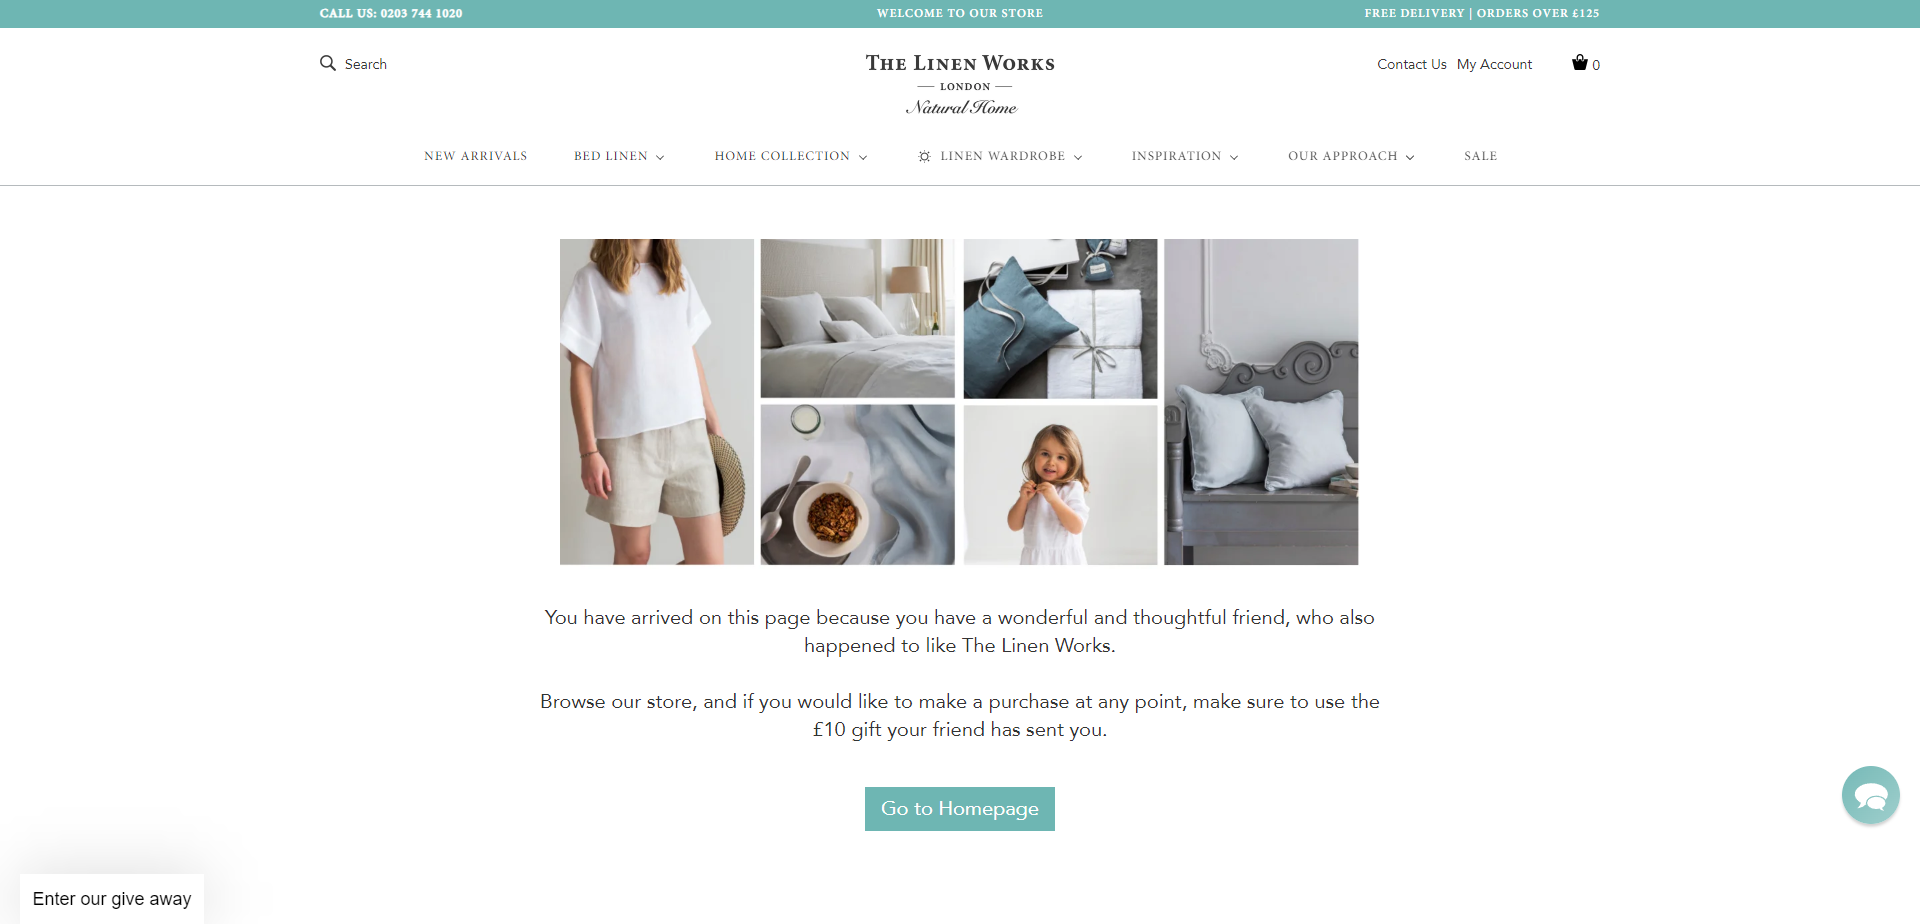 Referral Landing Page for The Linen Works